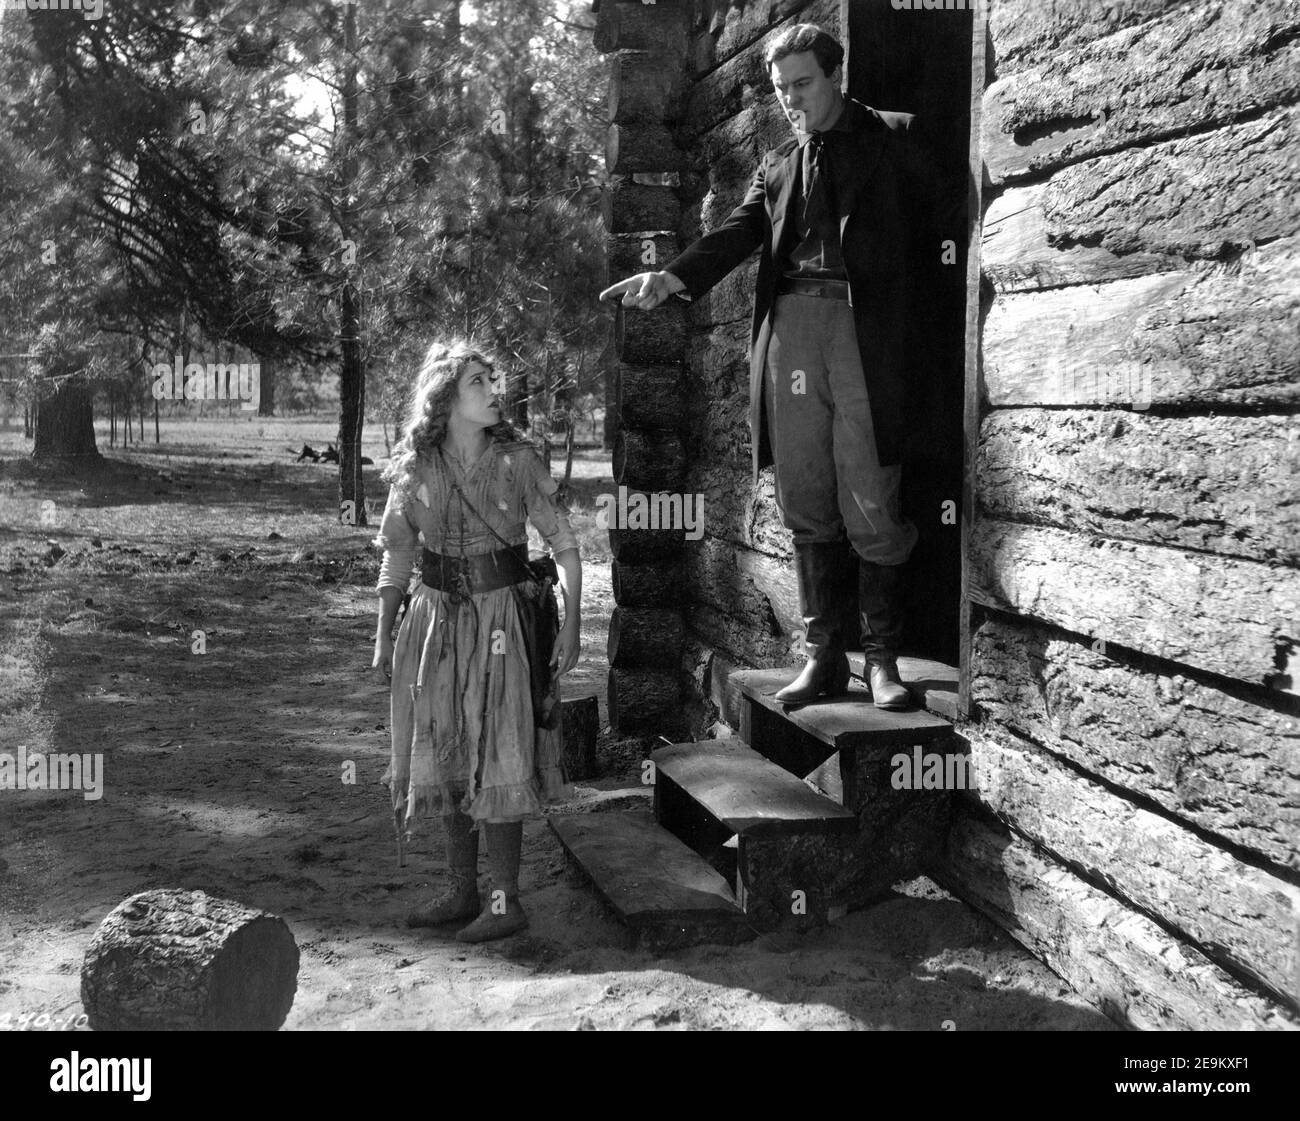 MARY PICKFORD and THOMAS MEIGHAN in M'LISS 1918 director MARSHALL NEILAN story Bret Harte scenario Frances Marion Pickford Film / Artcraft Pictures Corporation / Paramount Pictures Stock Photo